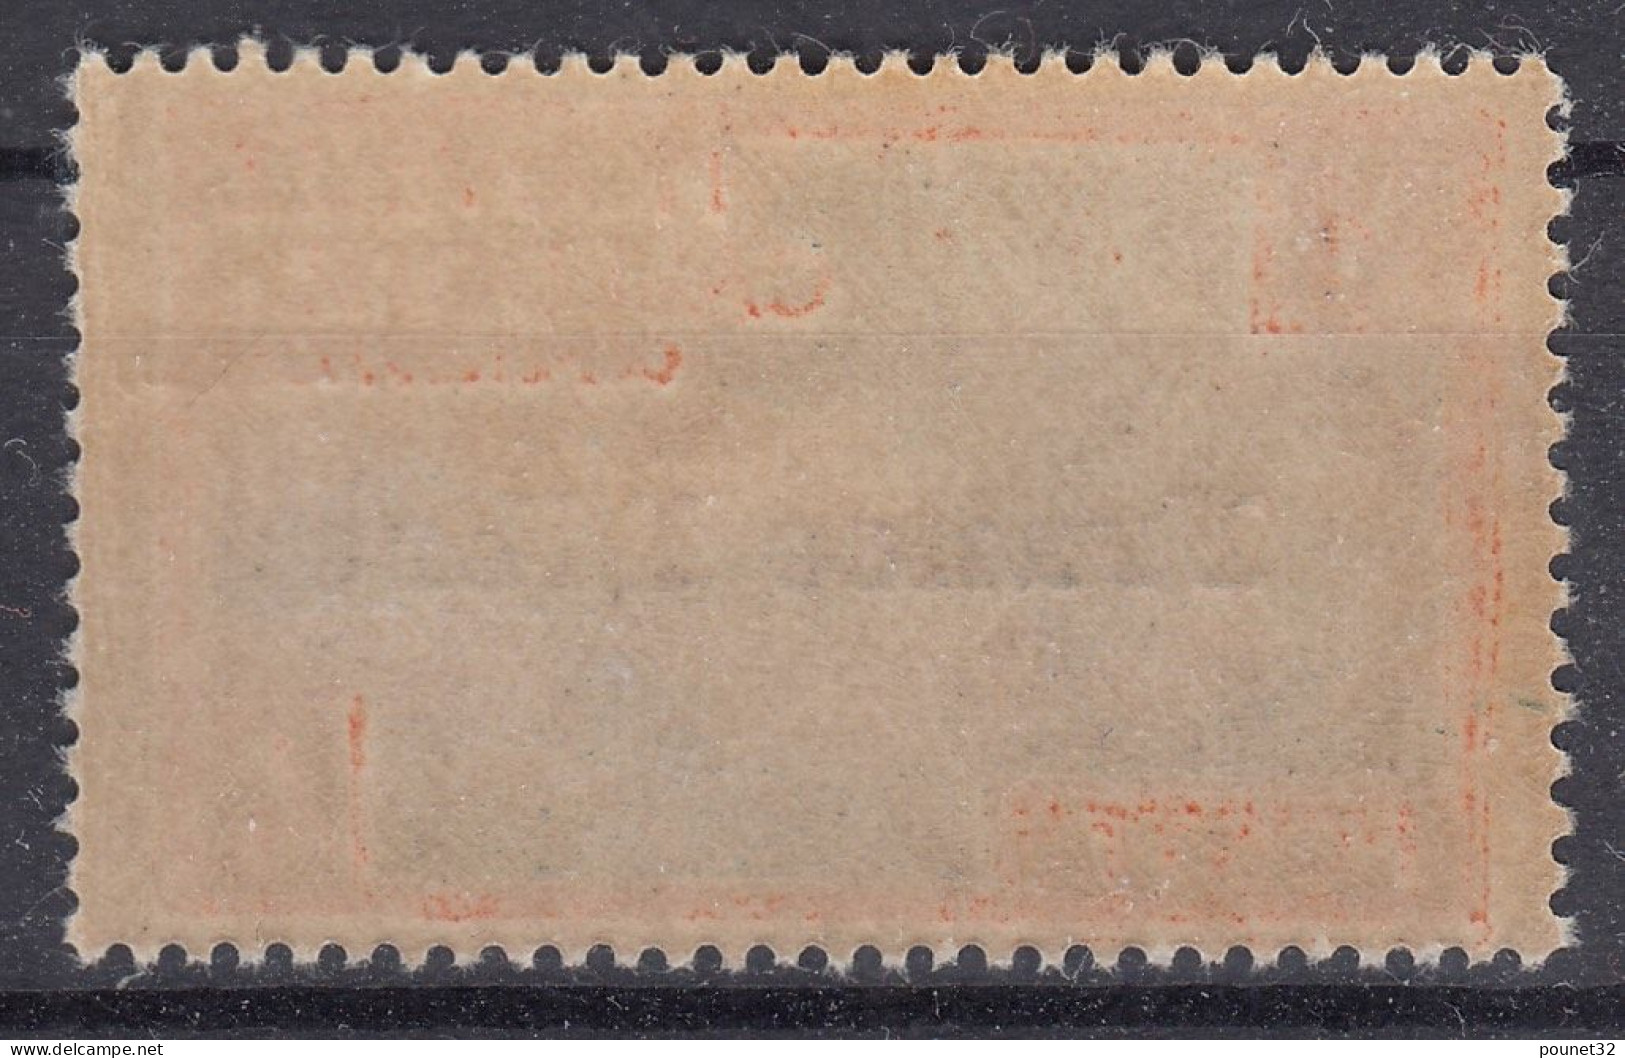 NOUVELLE CALEDONIE FRANCE LIBRE N° 198 NEUF GOMME COLONIALE SANS CHARNIERE - Nuovi